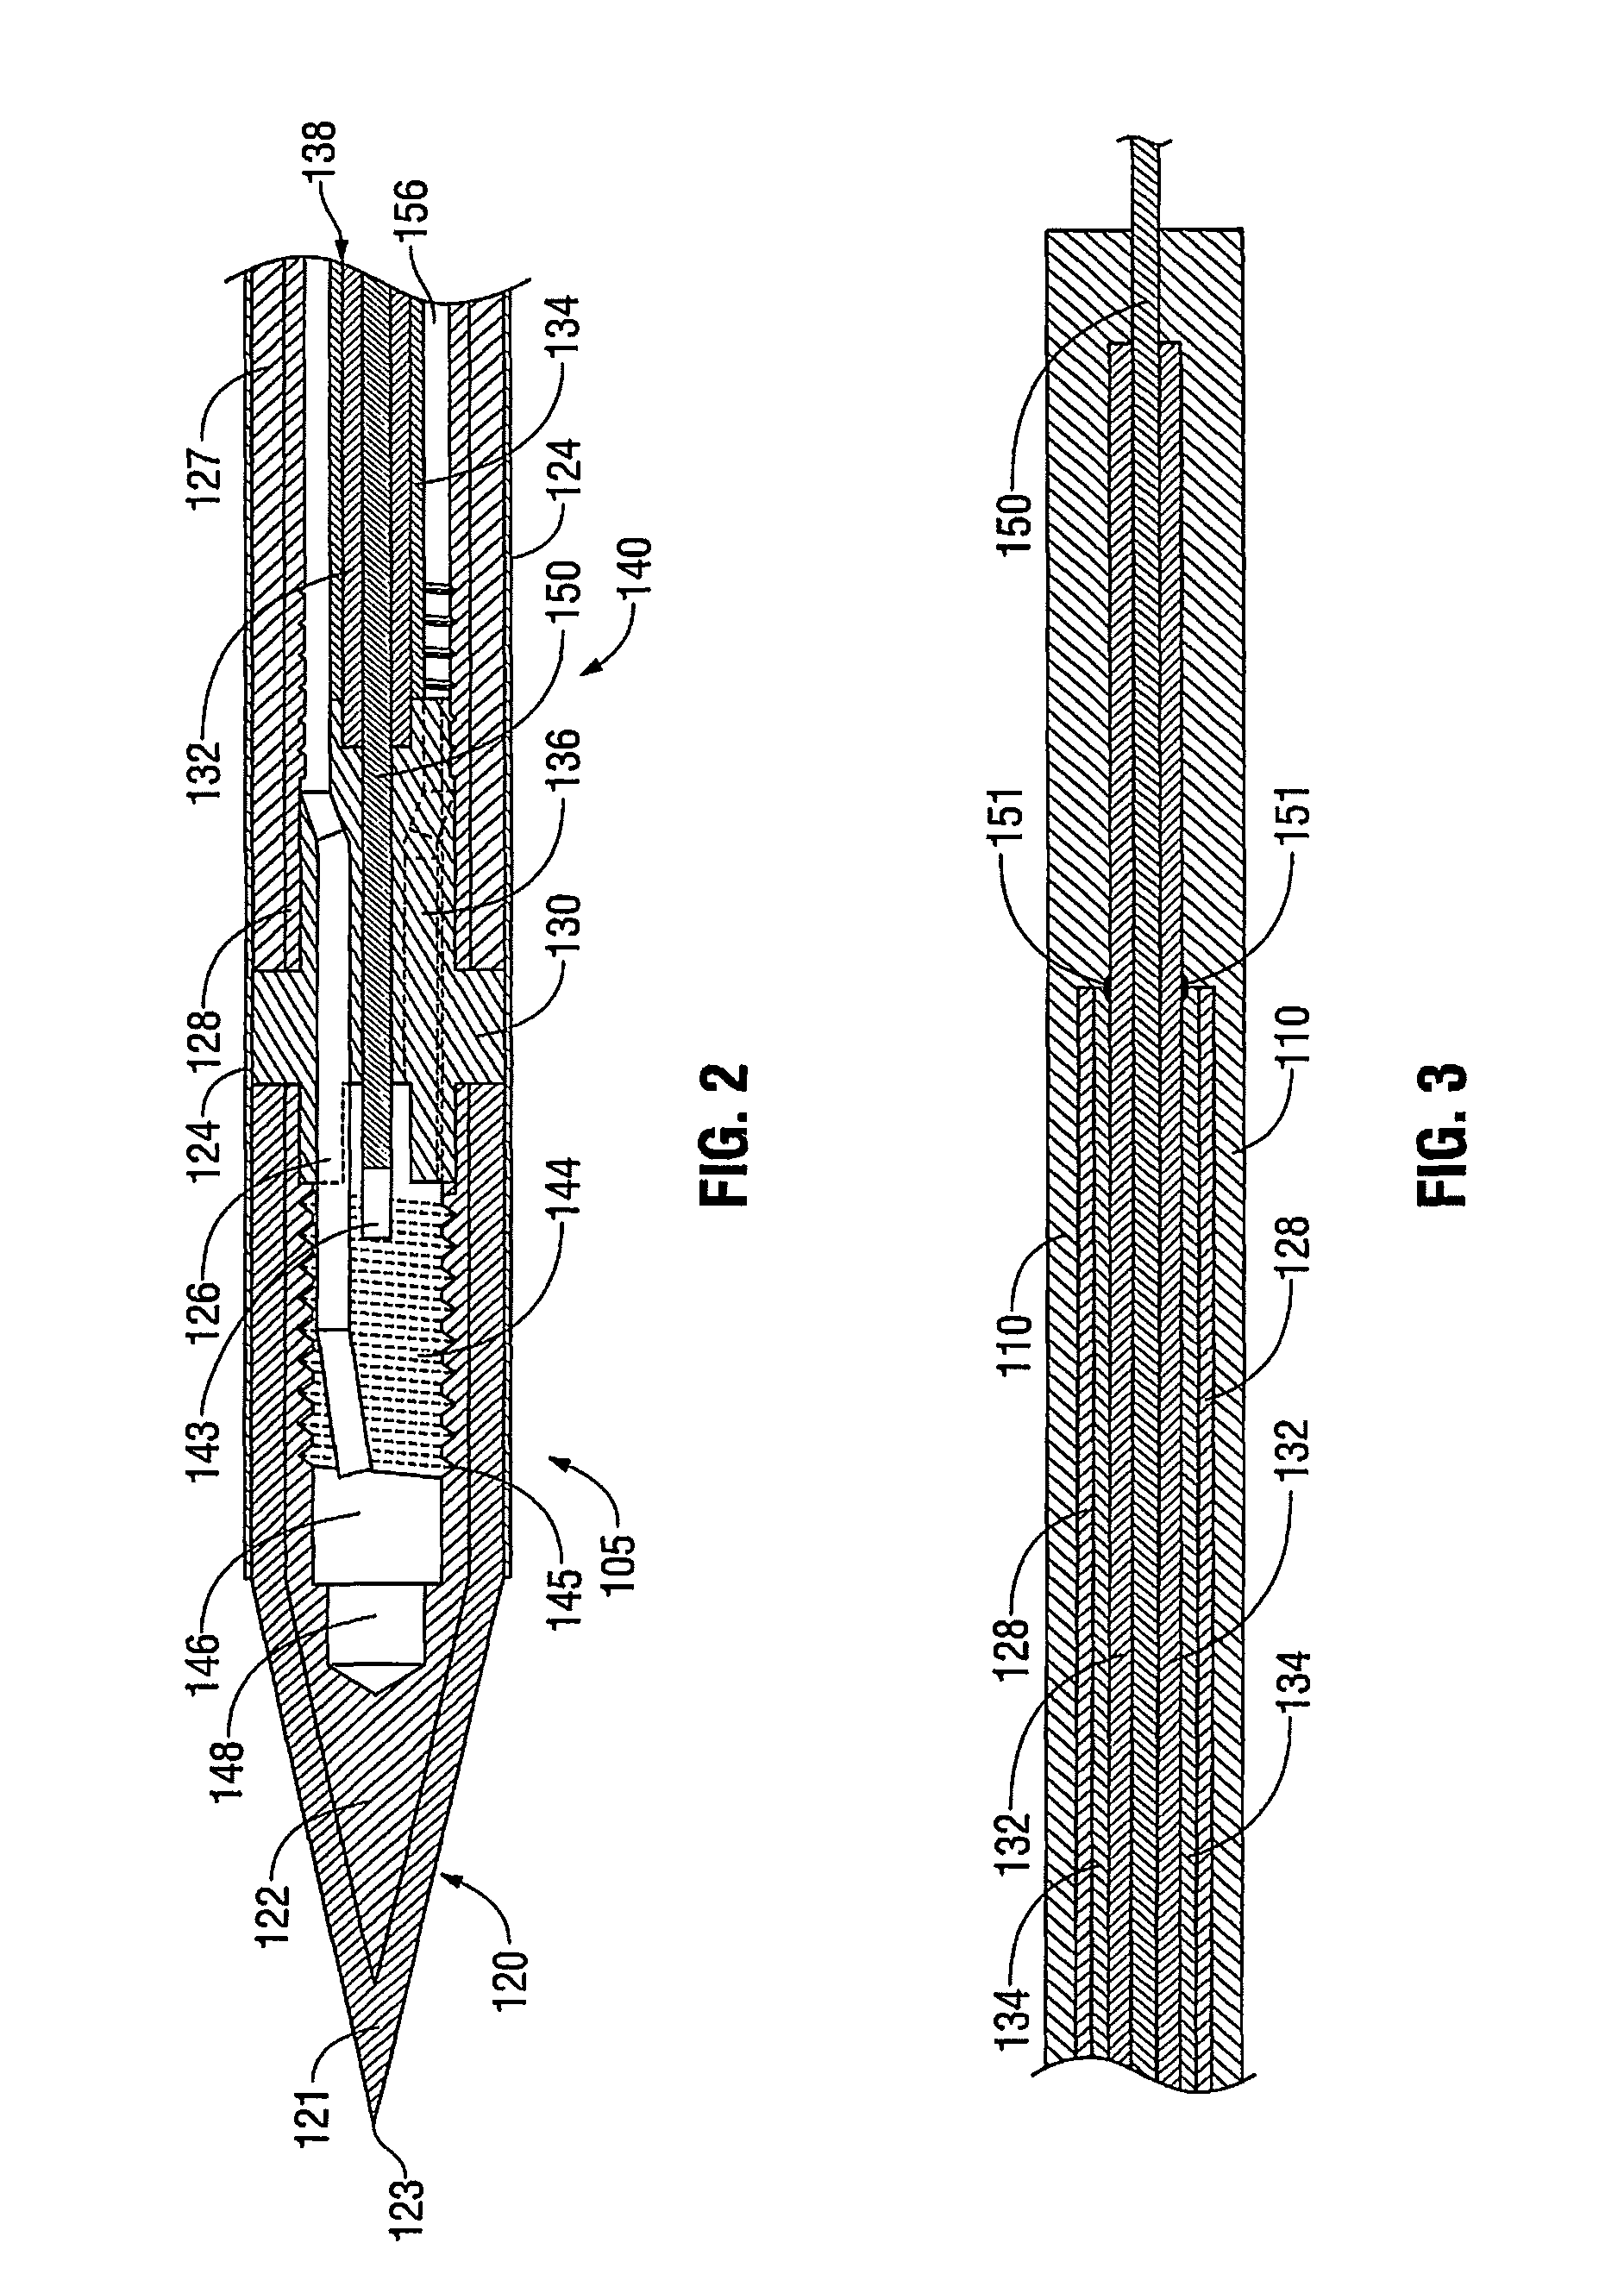 Tissue impedance measurement using a secondary frequency